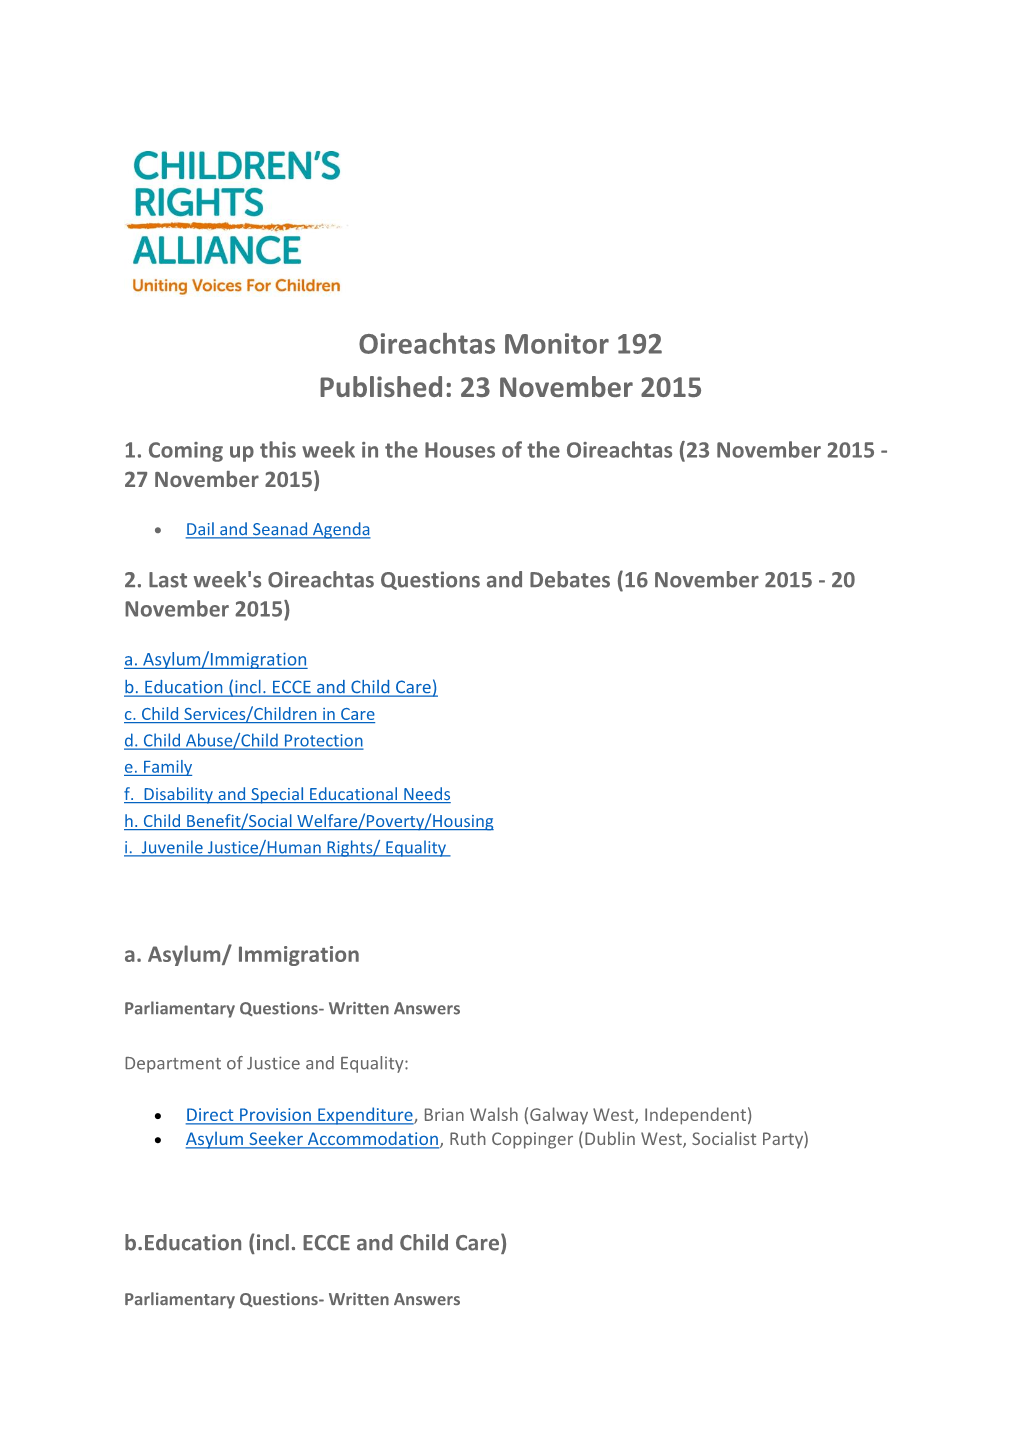 Oireachtas Monitor 192 Published: 23 November 2015